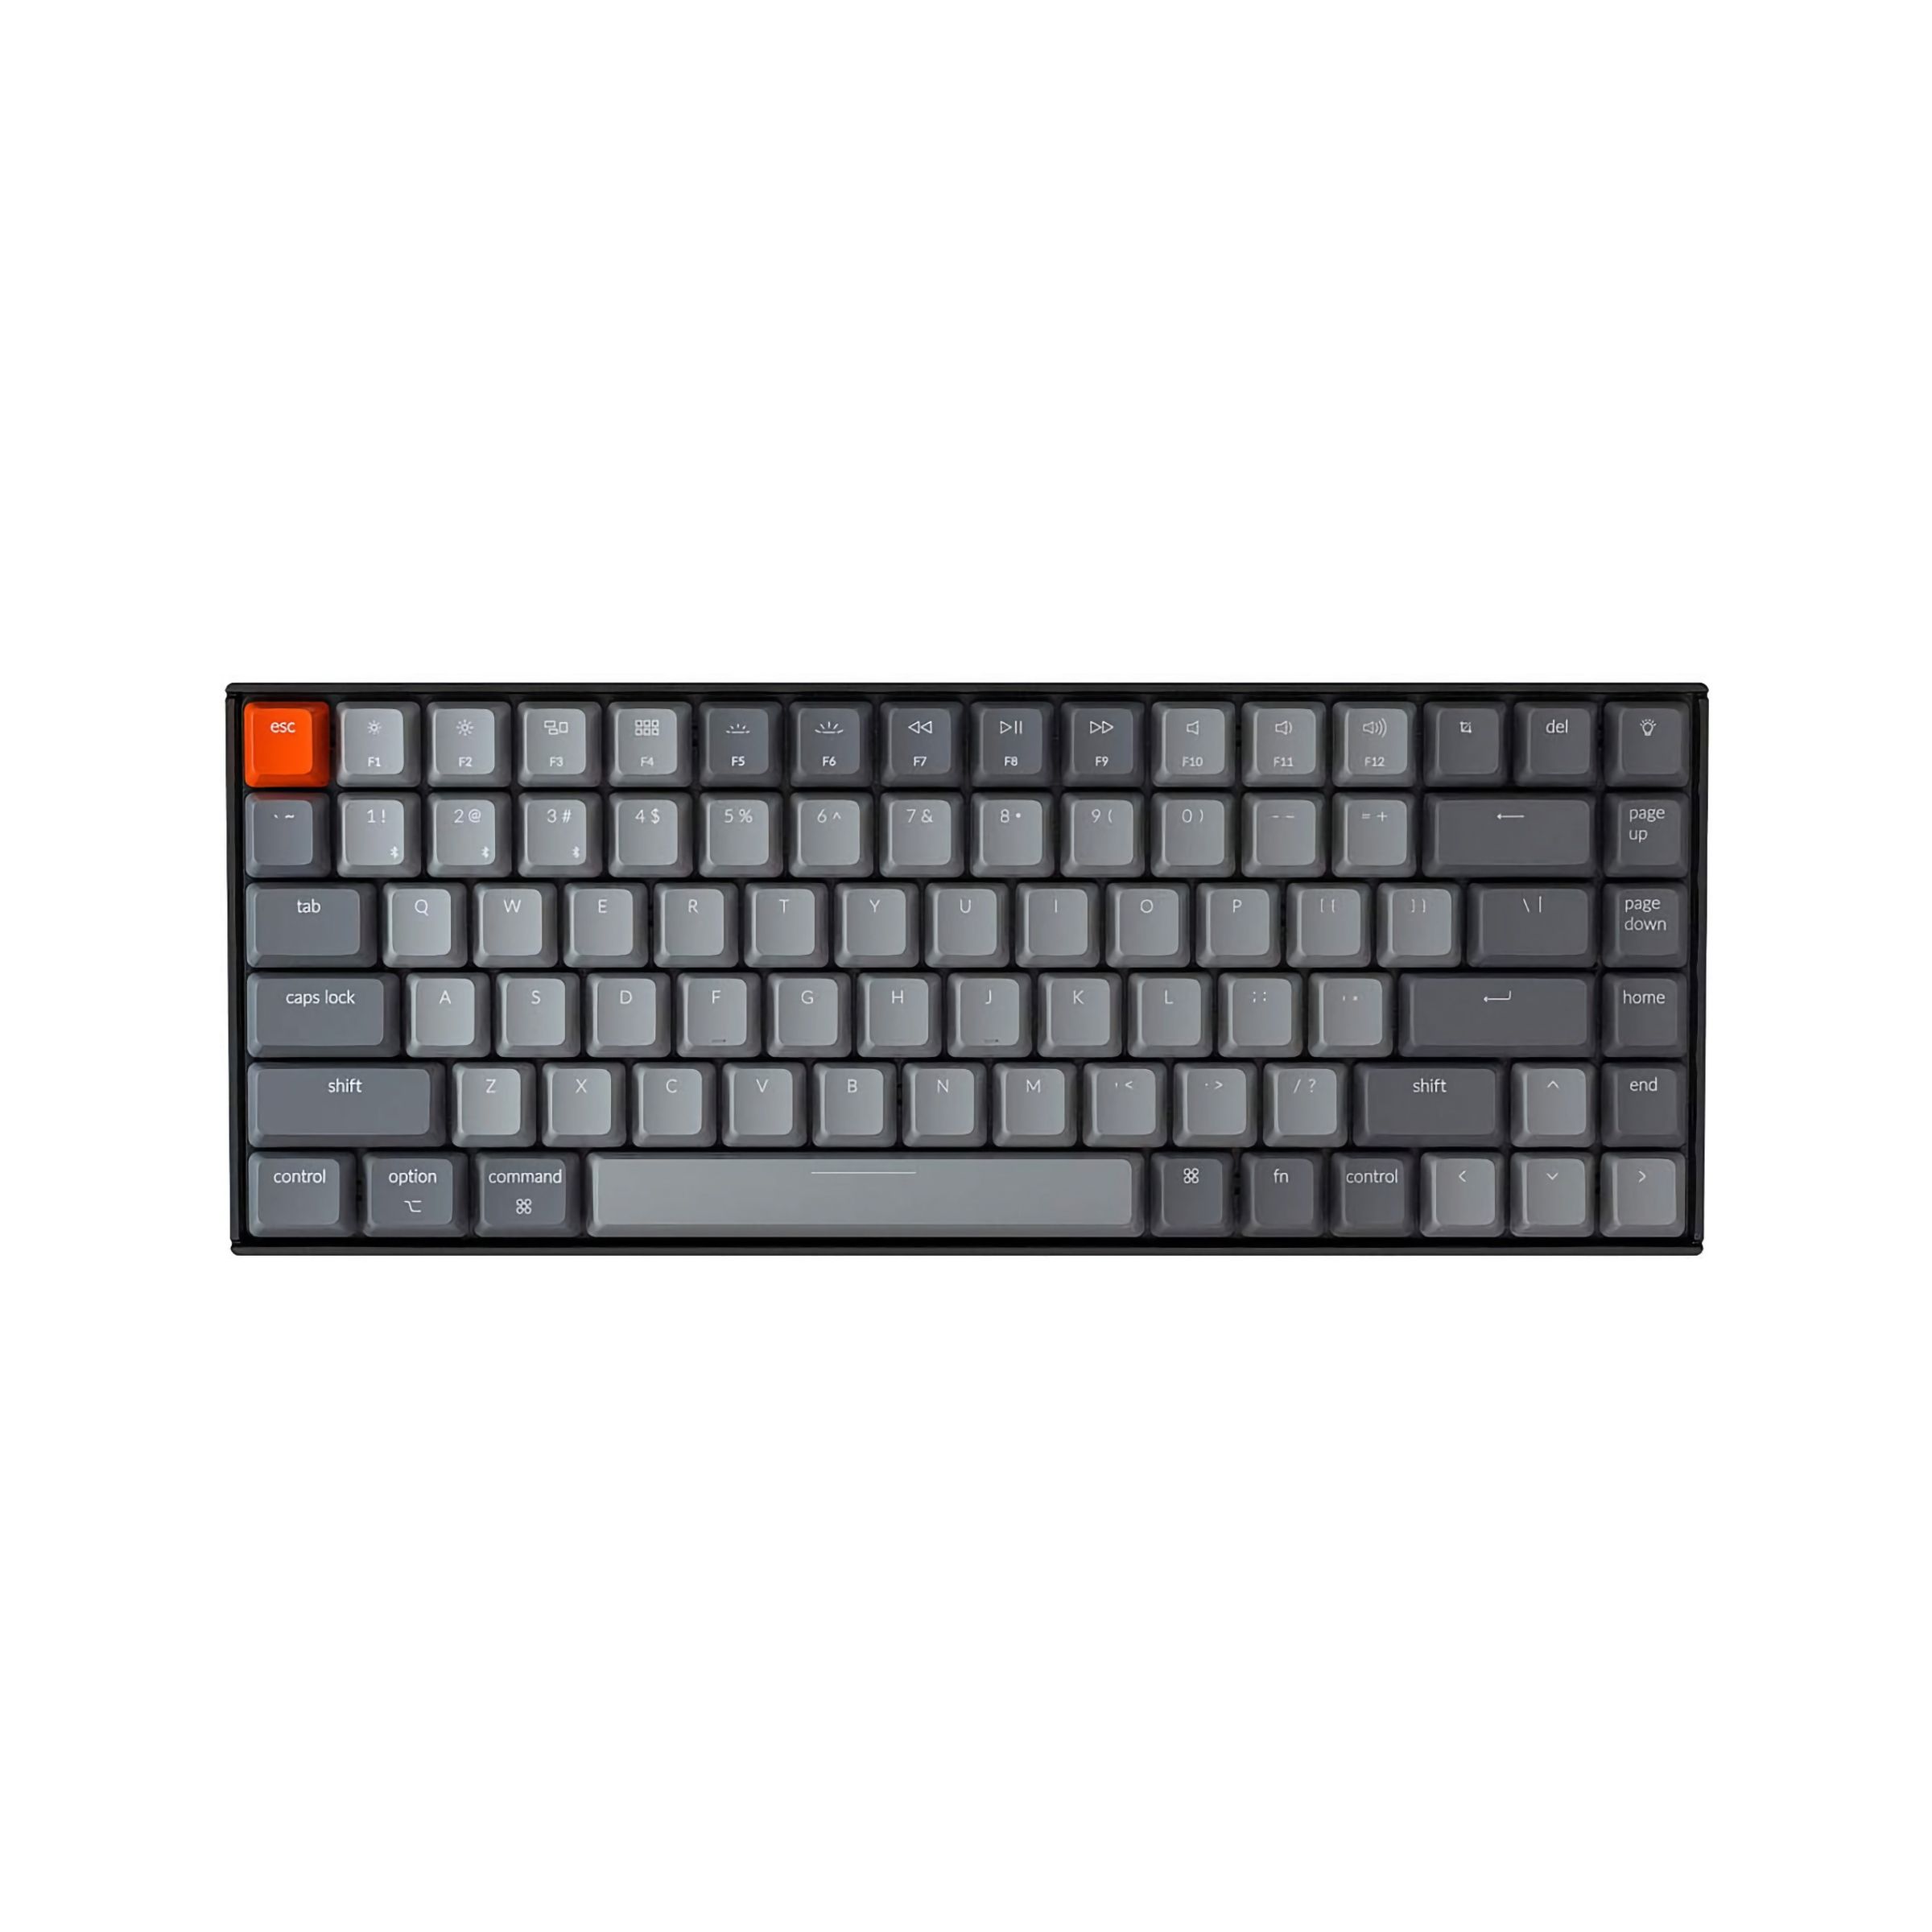 A grey mechanical keyboard with one orange key in the top left.